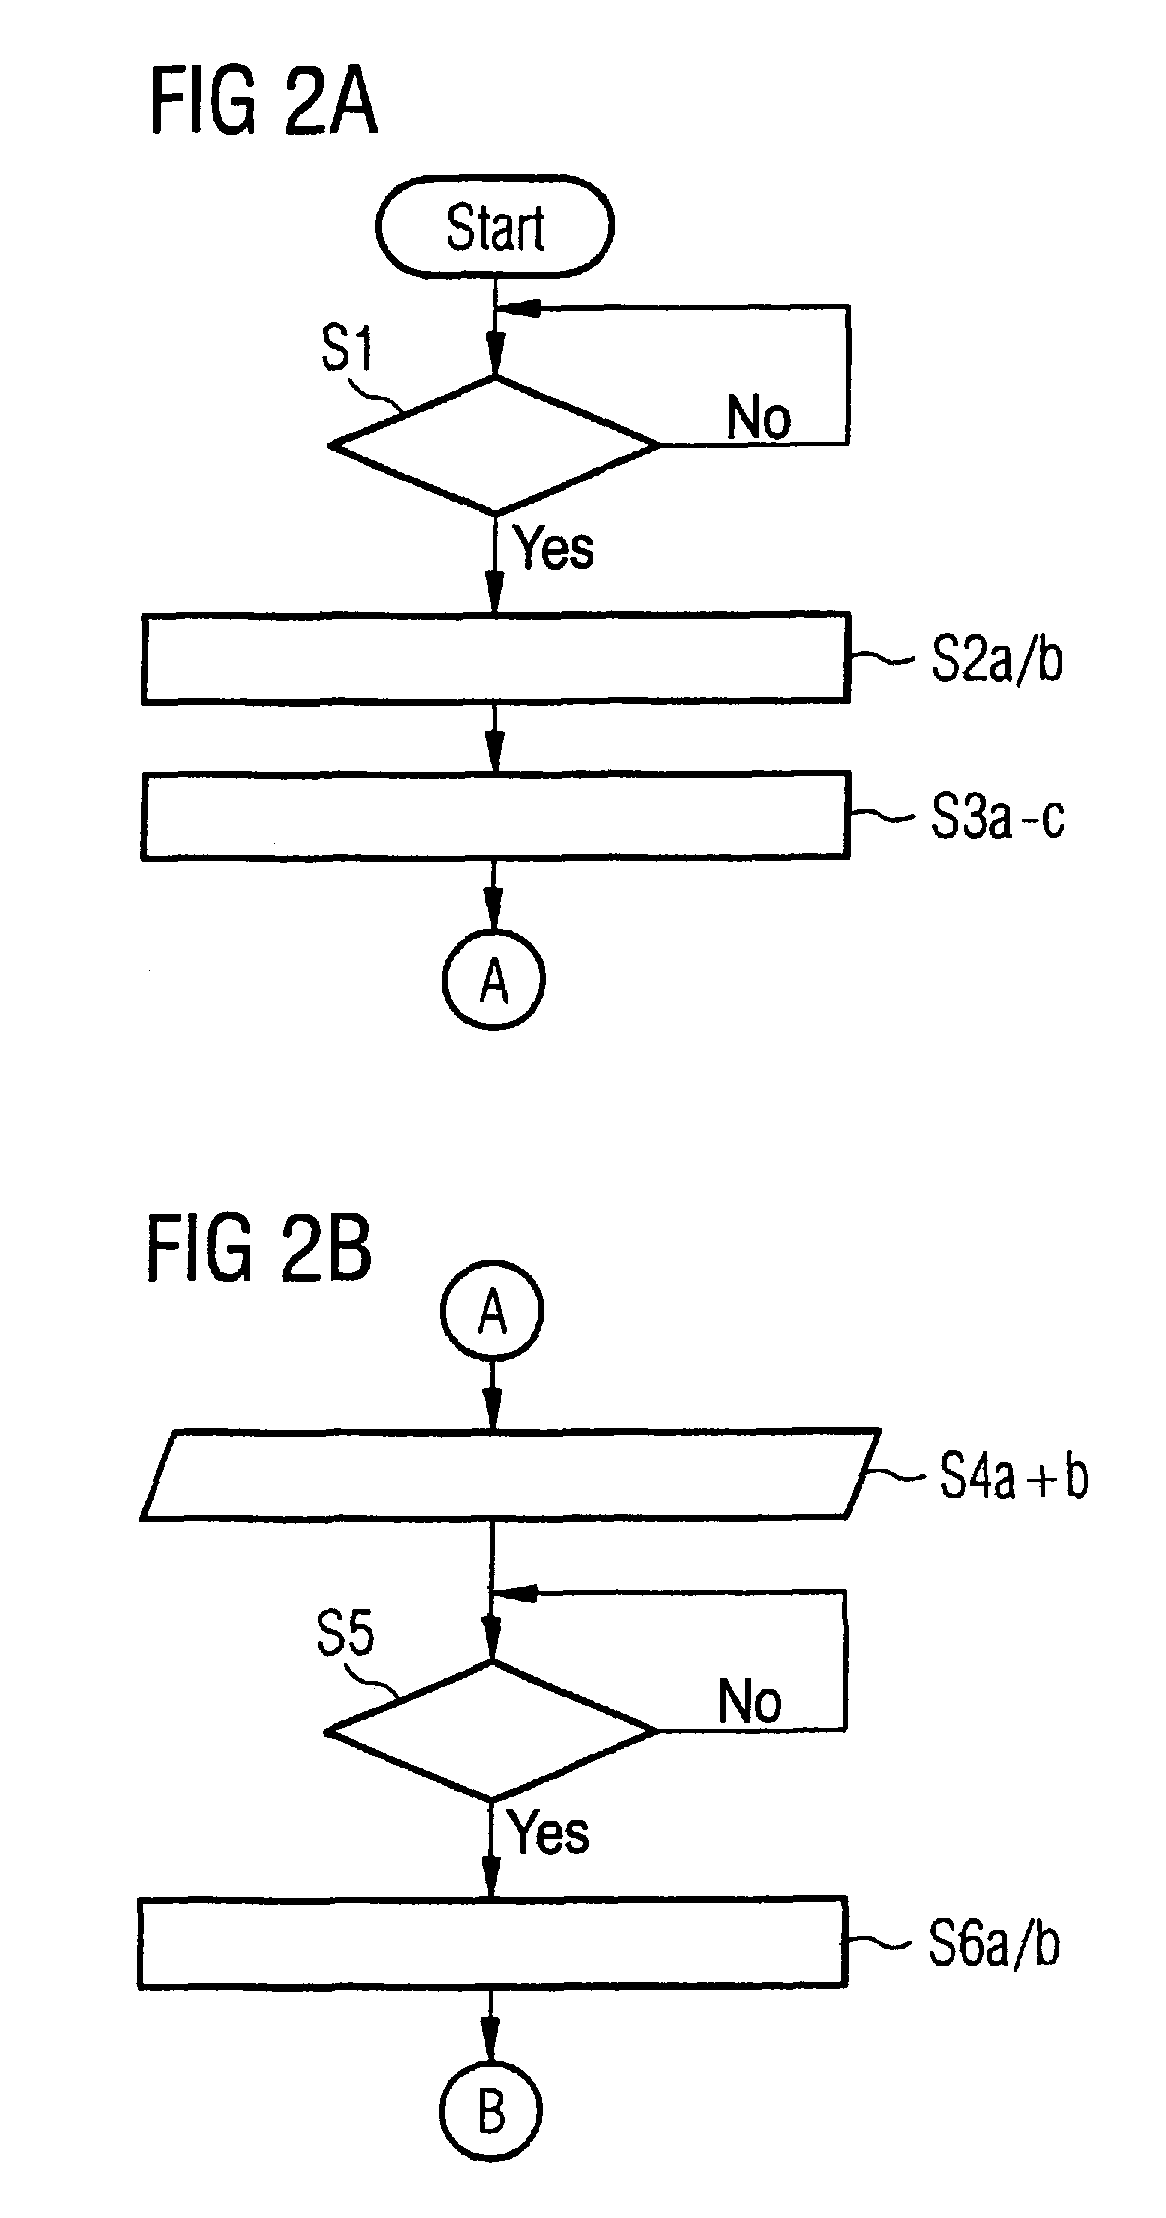 Image acquisition, archiving and rendering system and method for reproducing imaging modality examination parameters used in an initial examination for use in subsequent radiological imaging